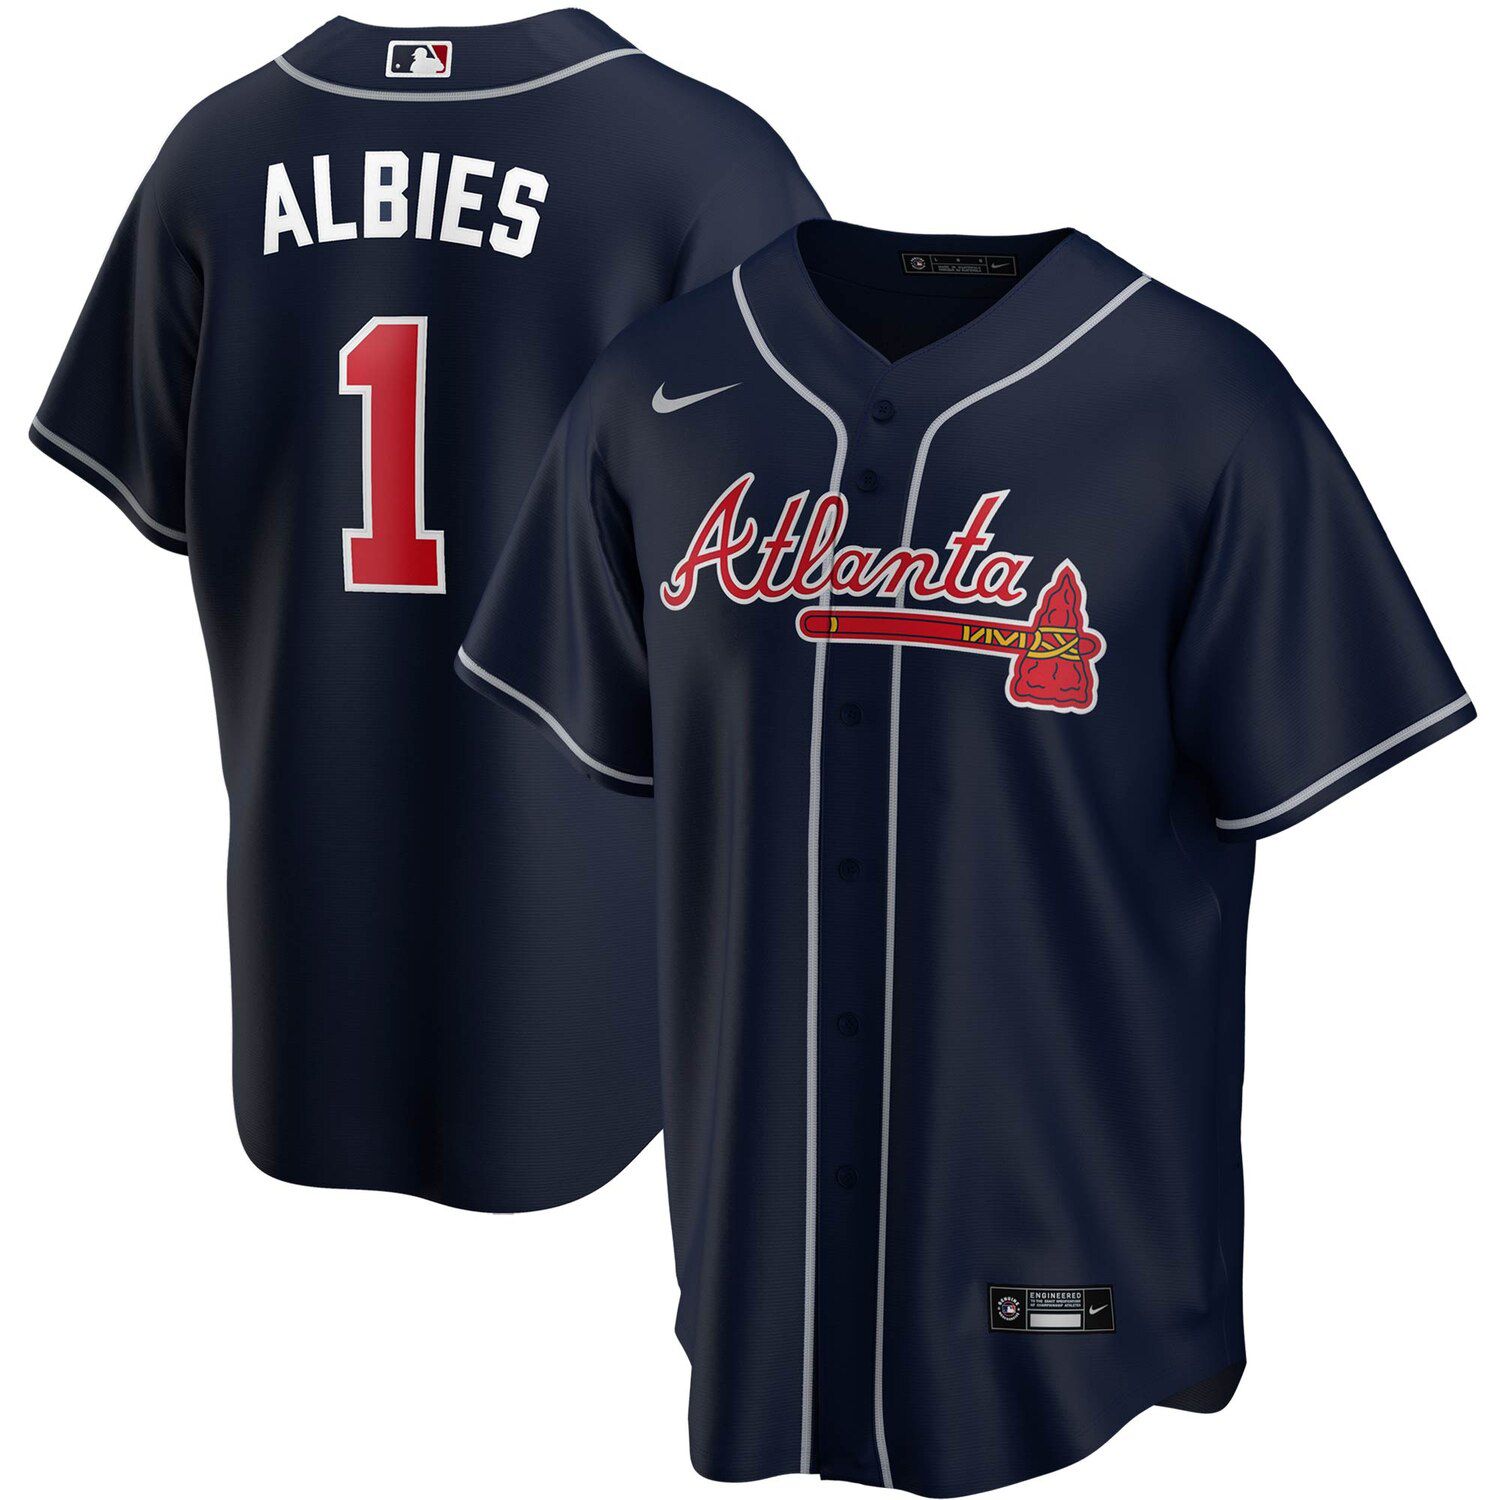 No1 Ozzie Albies Men's Nike White Home 2020 Authentic Player Jersey